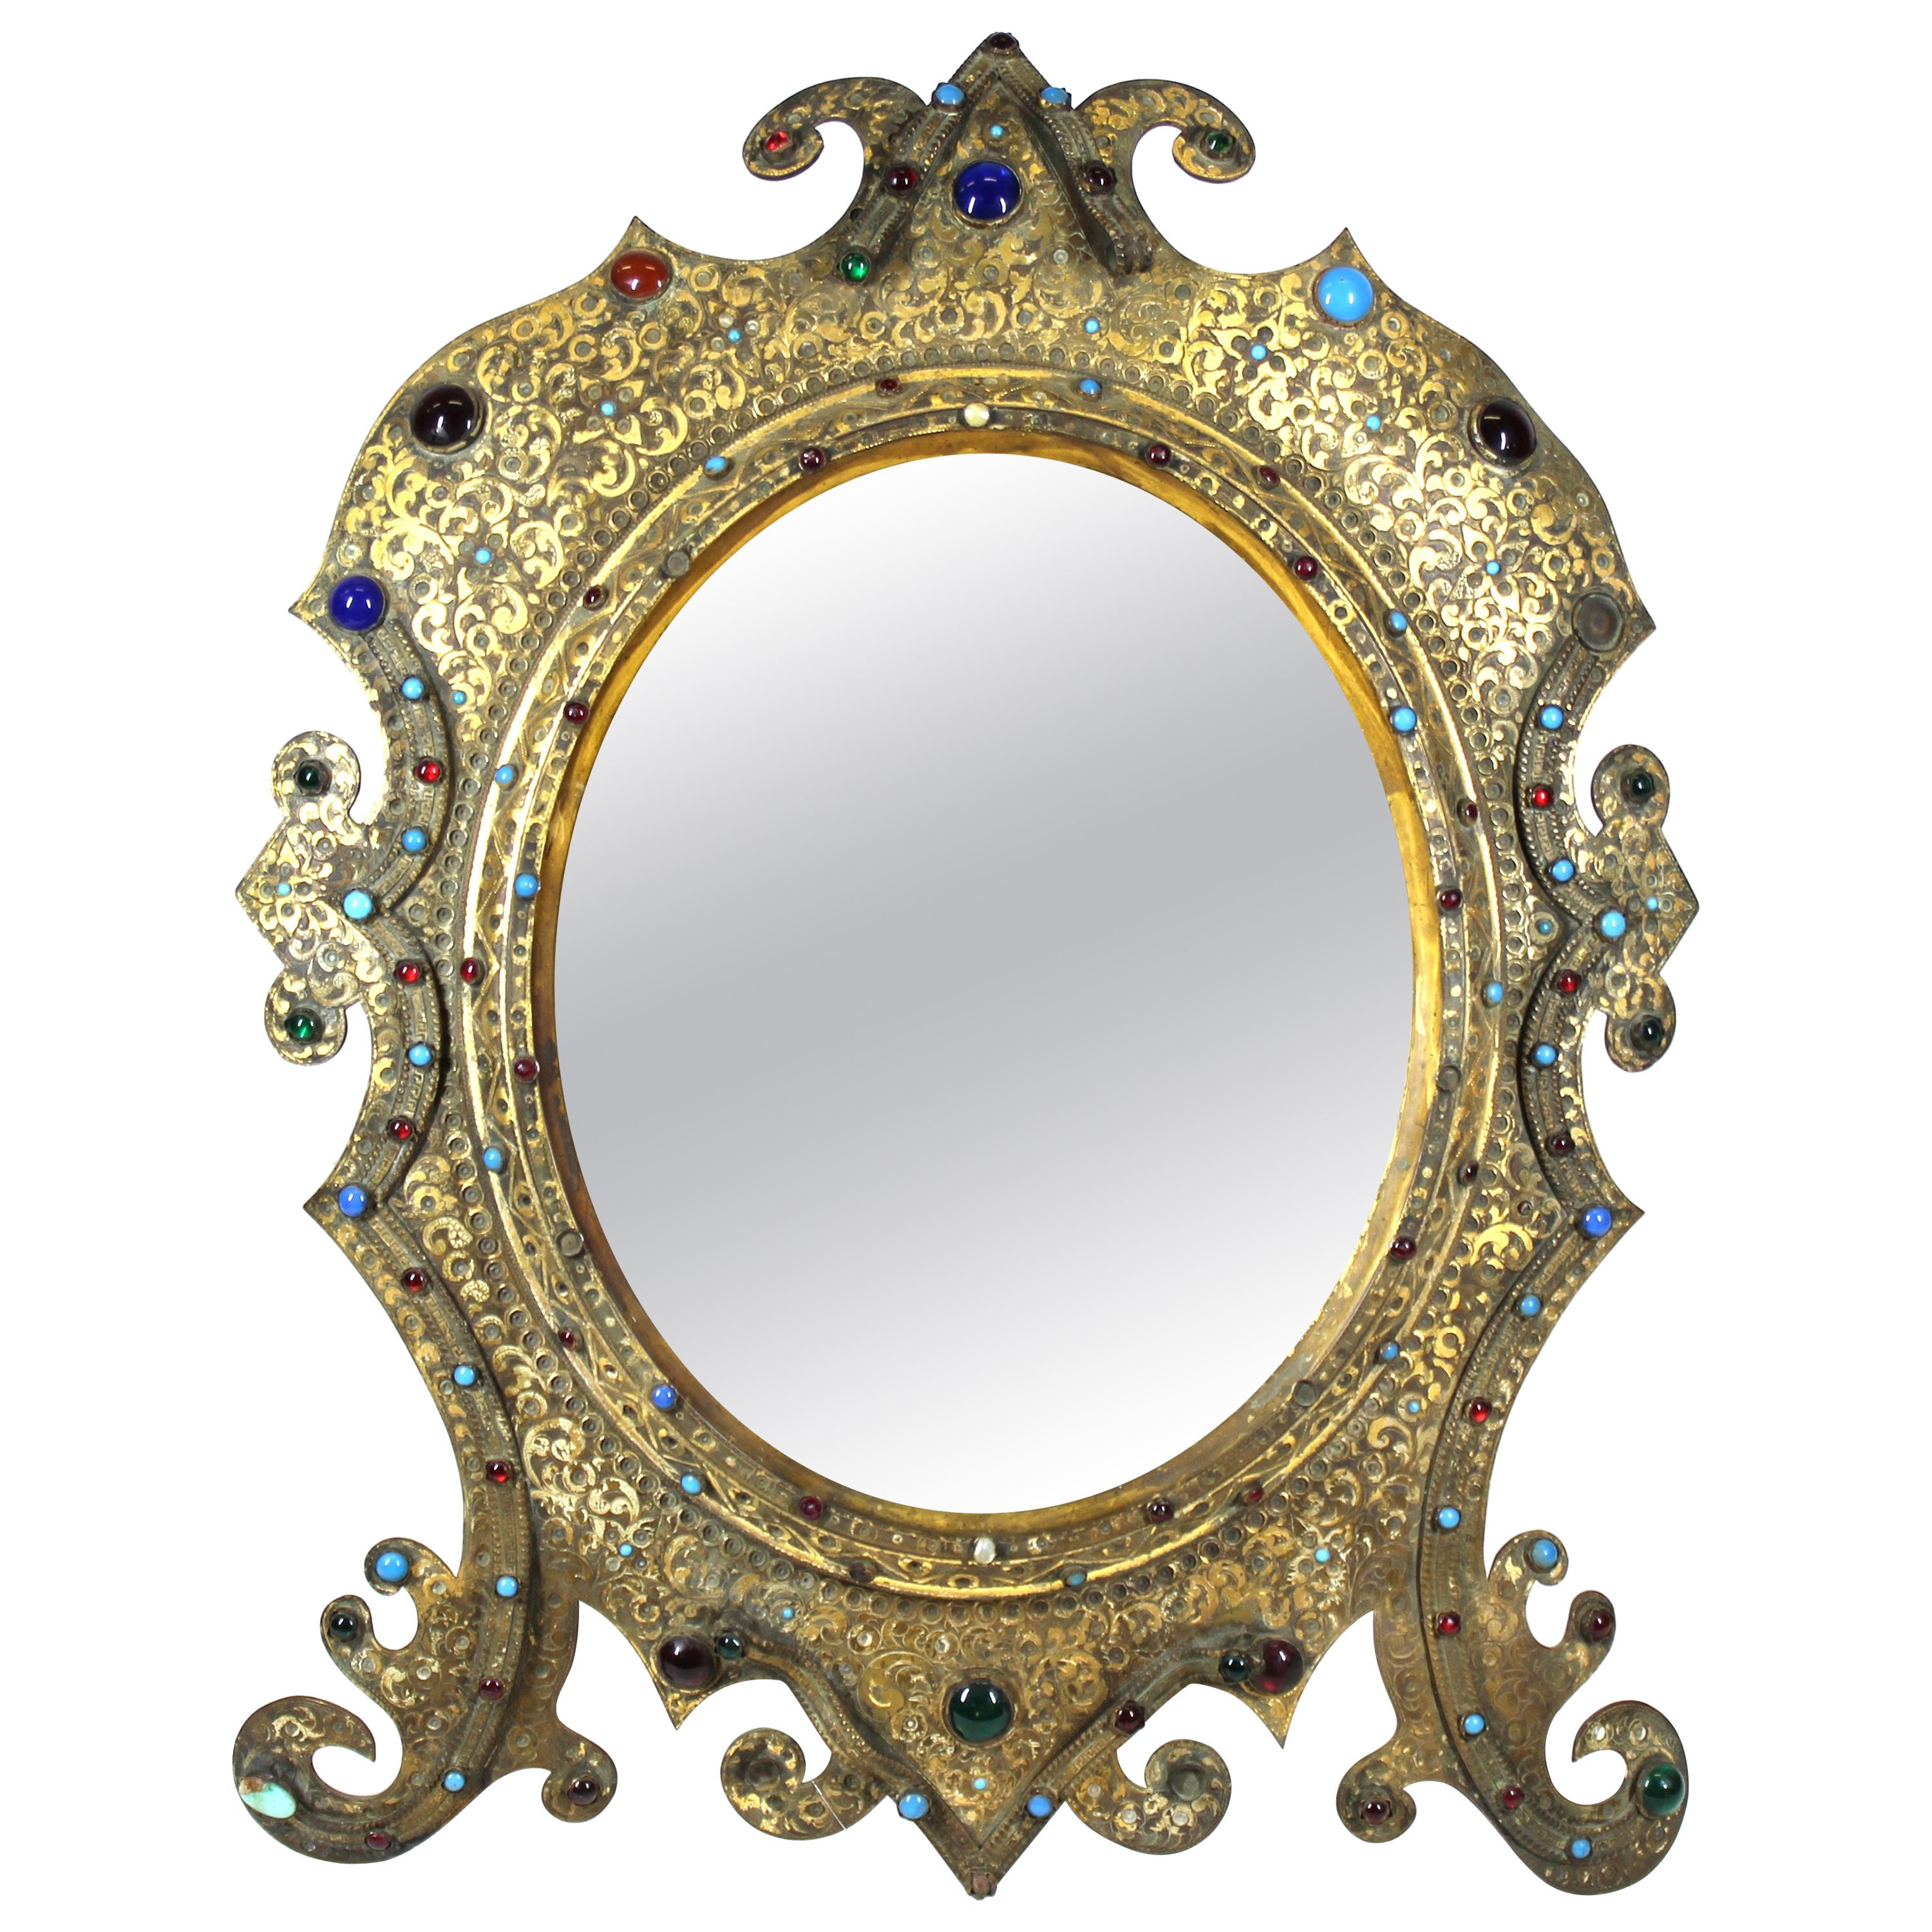 Austrian Moorish Revival Gilded Bronze Enameled and Bejeweled Oval Table Mirror For Sale